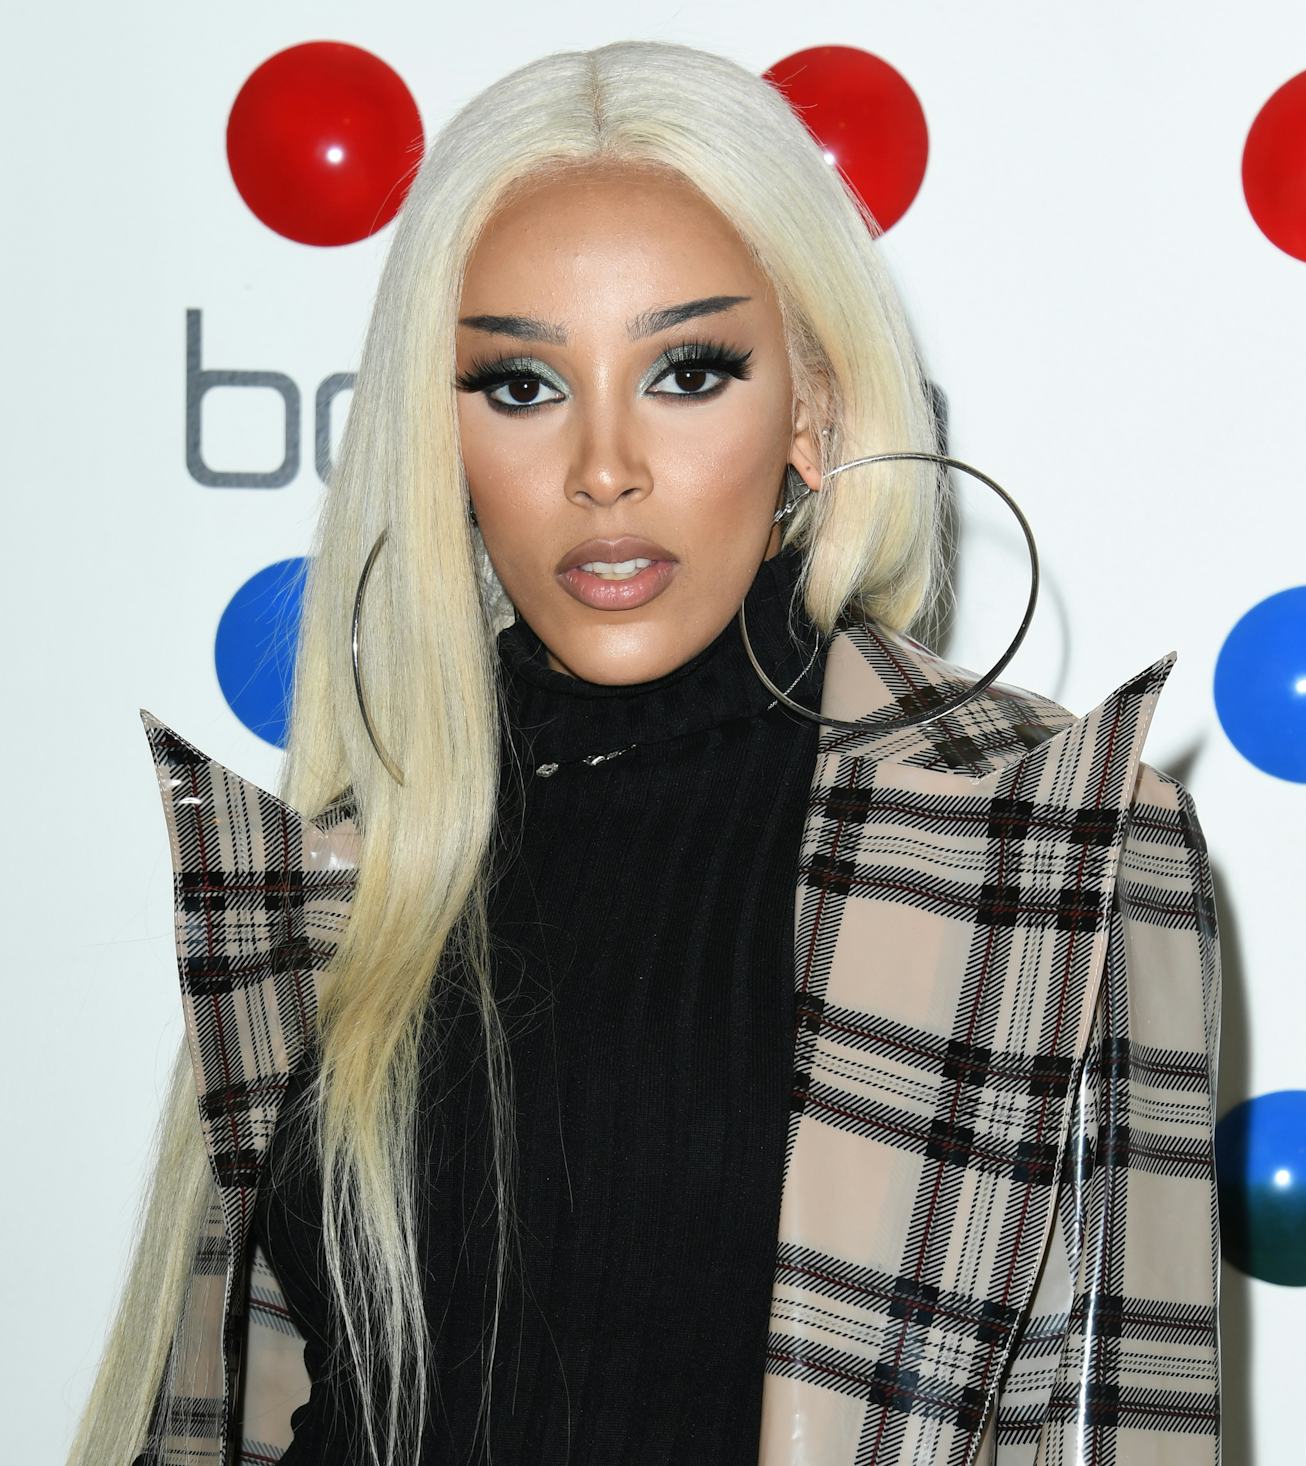 Doja Cat attends Influencer Management Company Influences' Hosts Launch Party For Girls In The Valle...